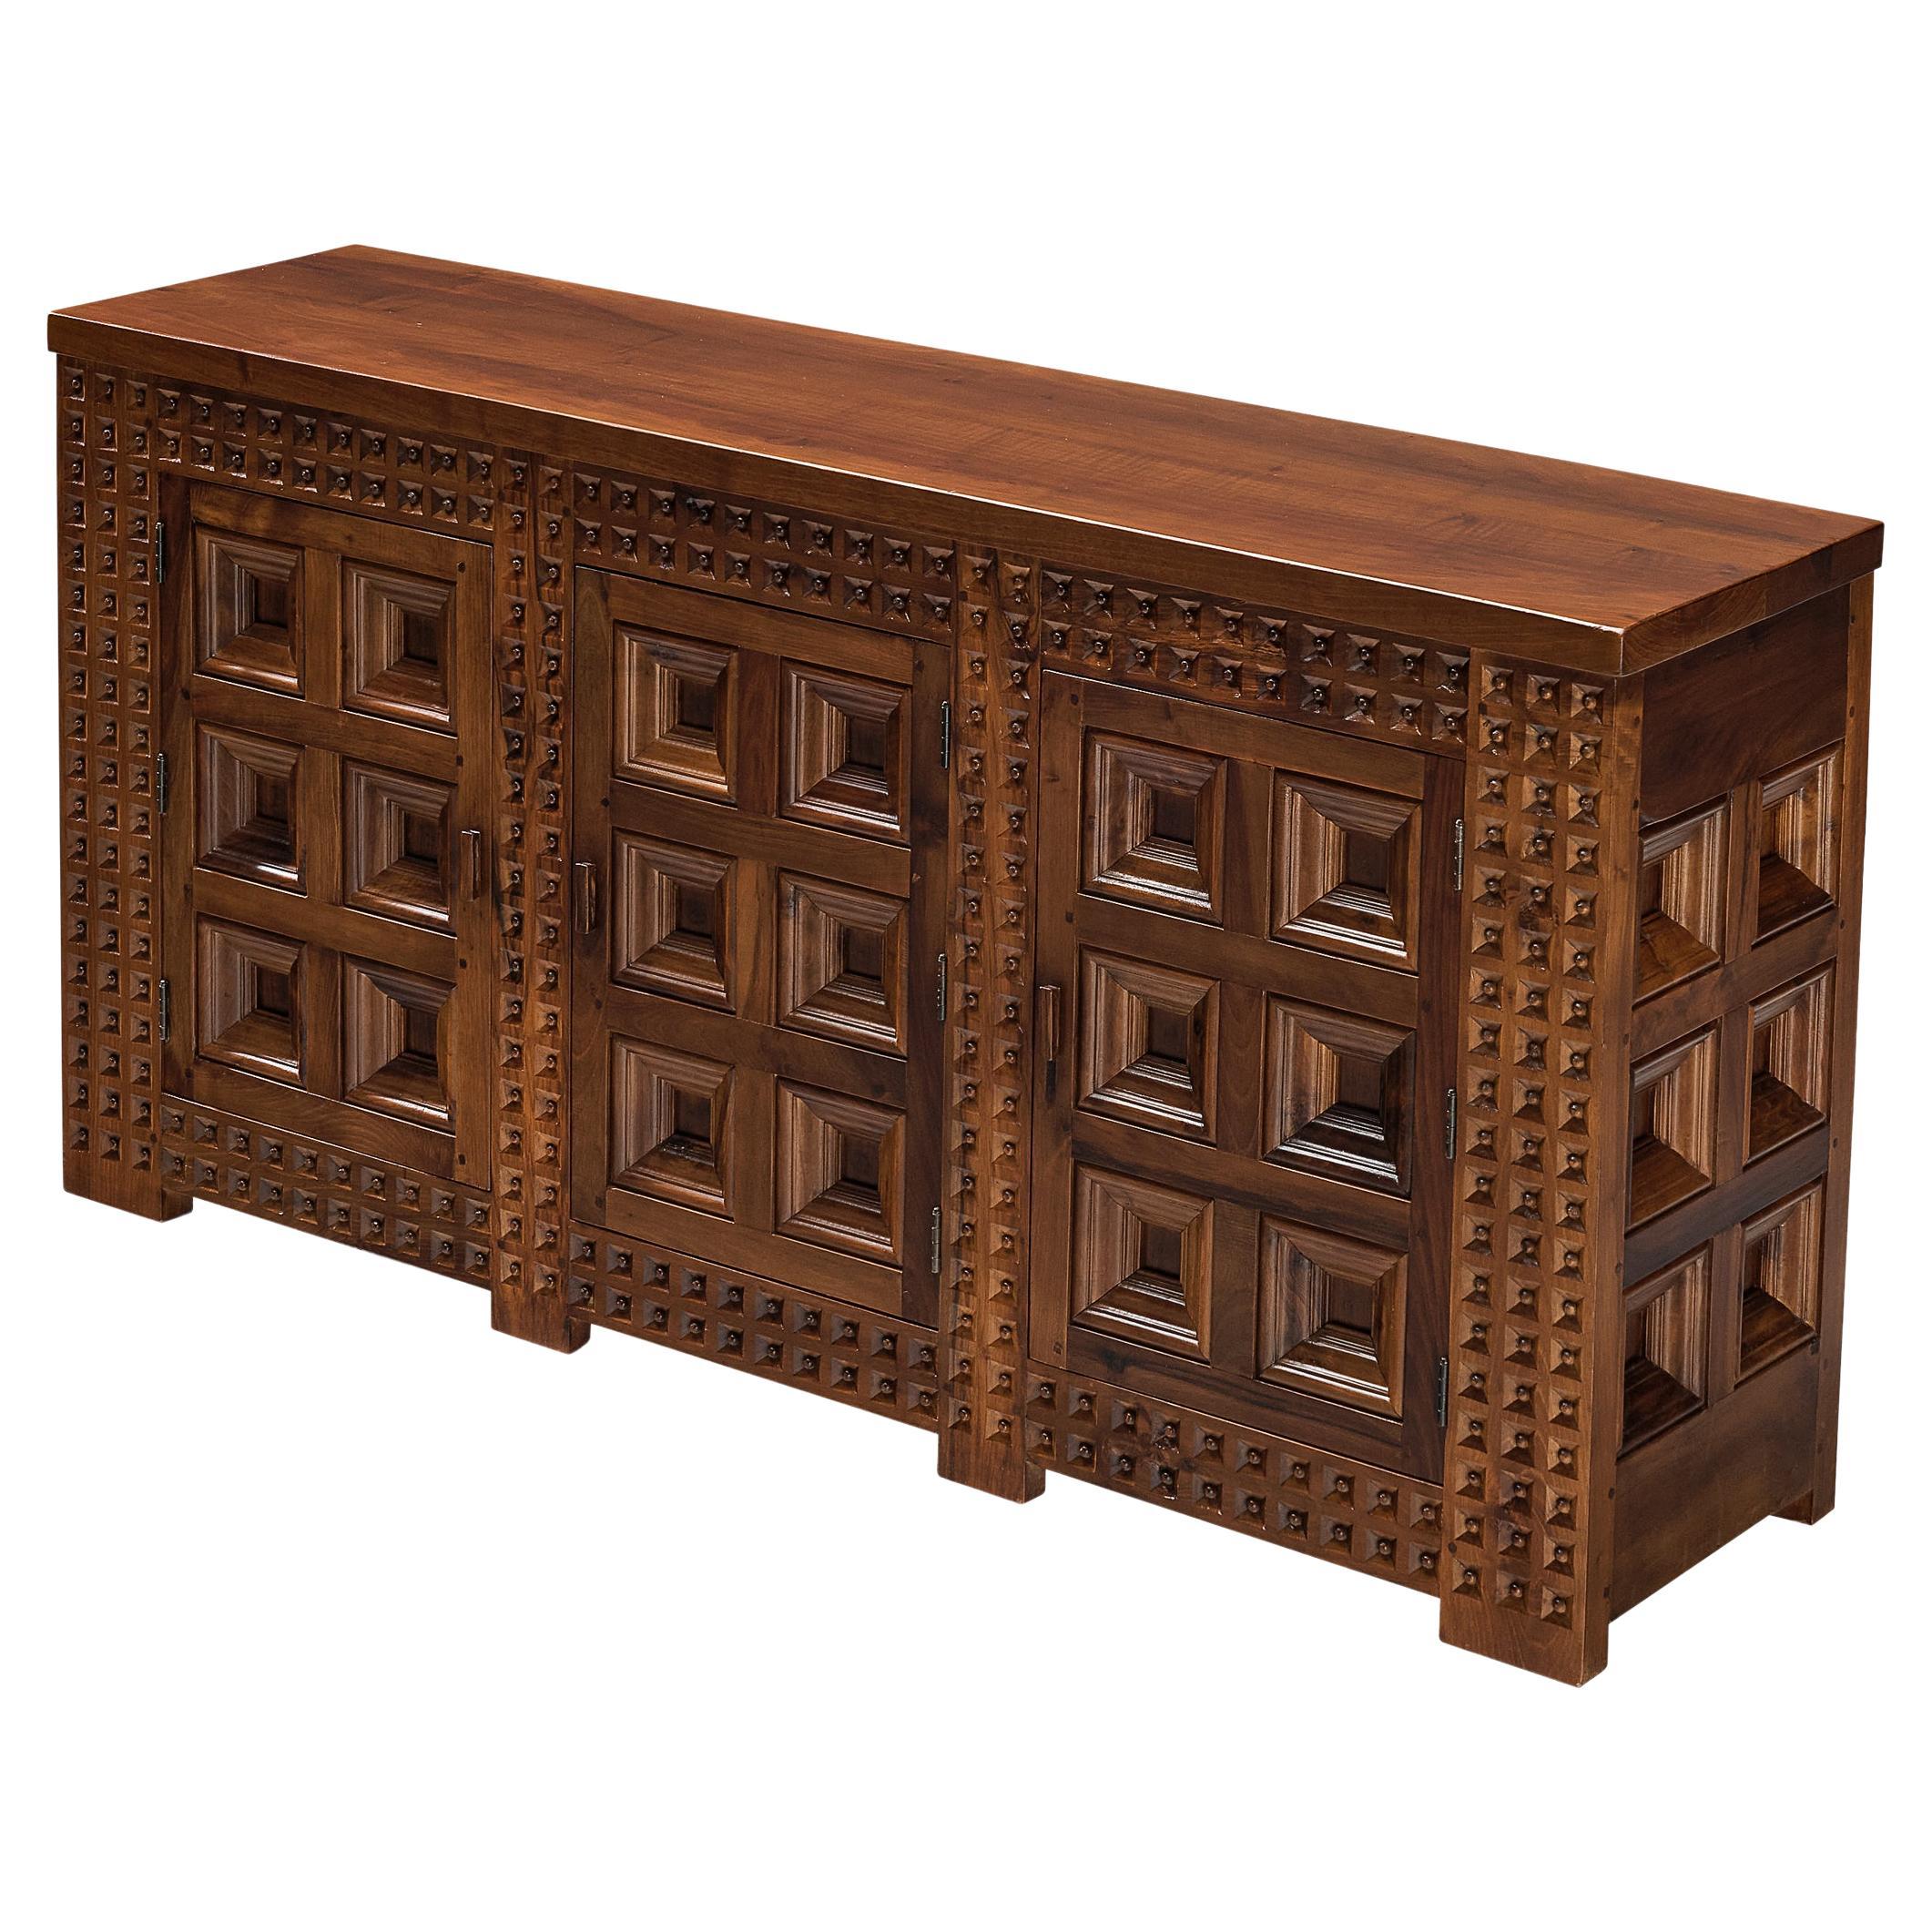 Spanish Brutalist Sideboard with Sophisticated Carvings in Walnut 